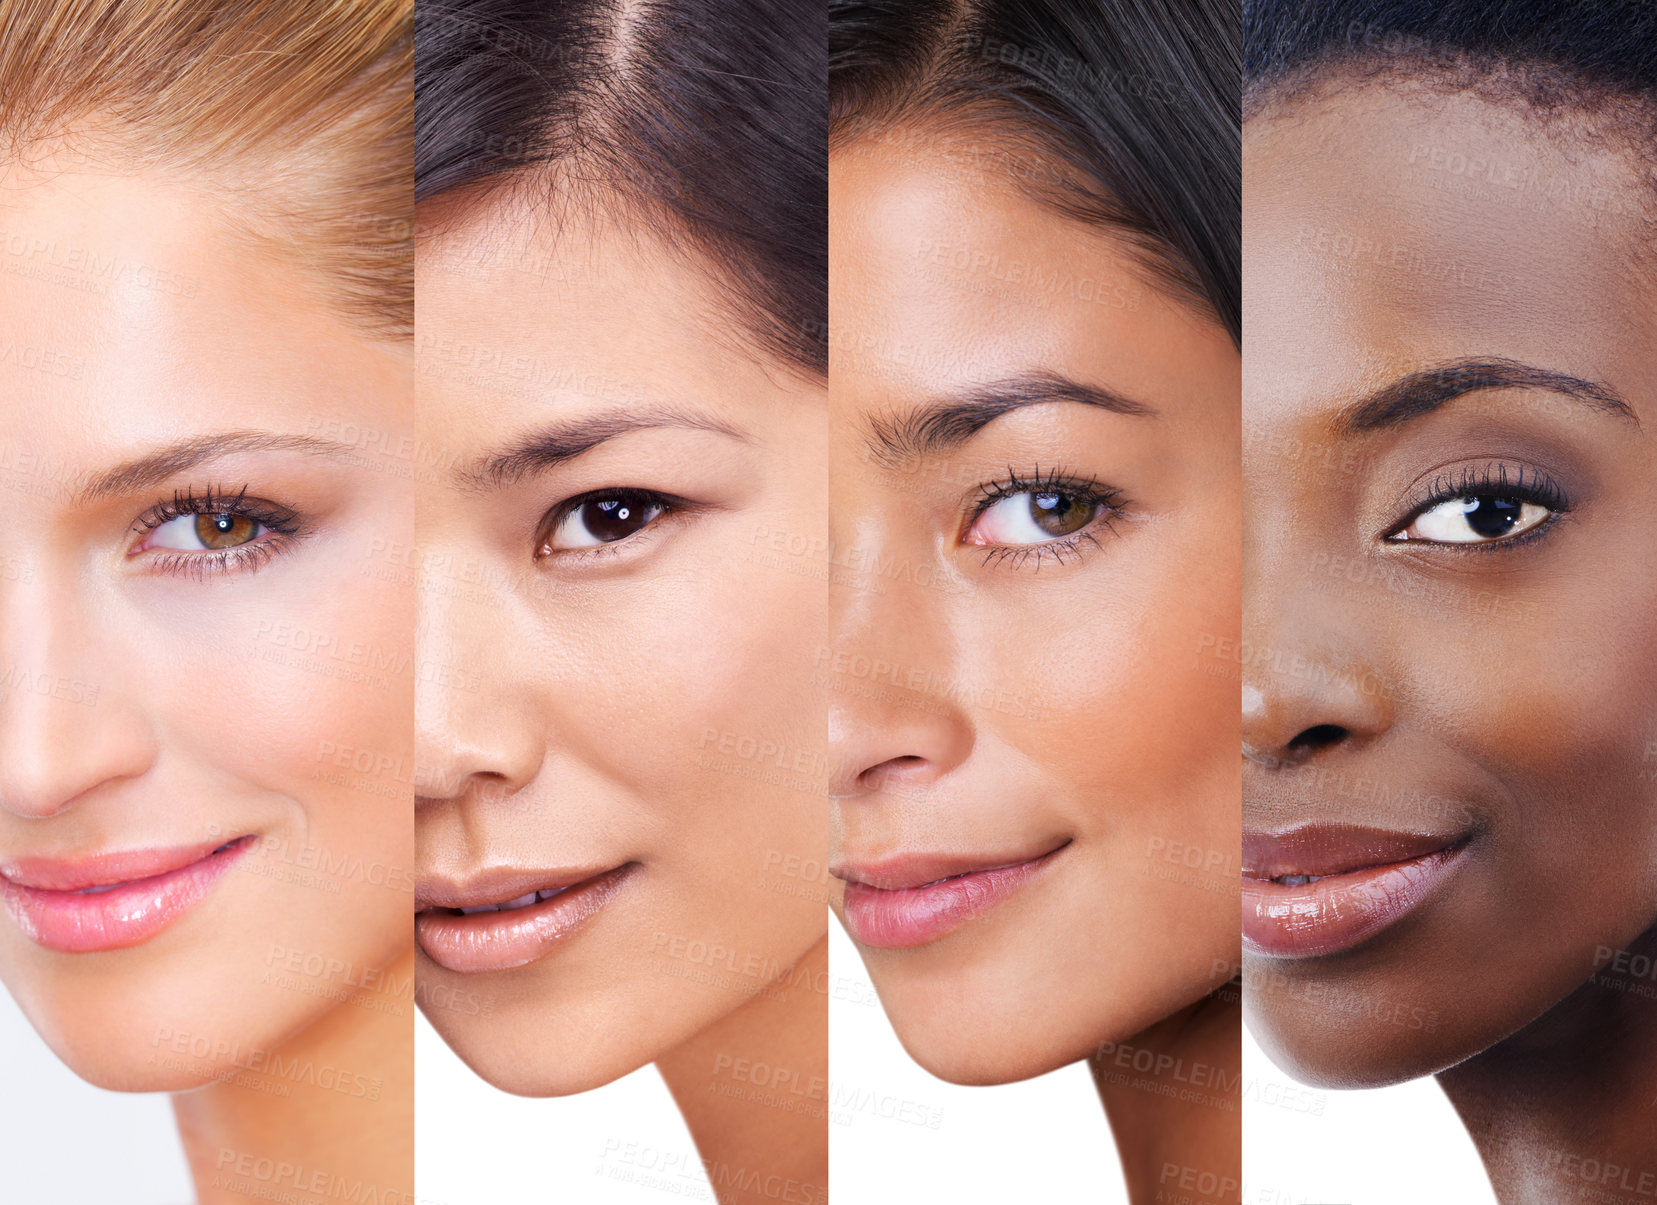 Buy stock photo Shot of woman with different skintones superimposed over each other in the studio